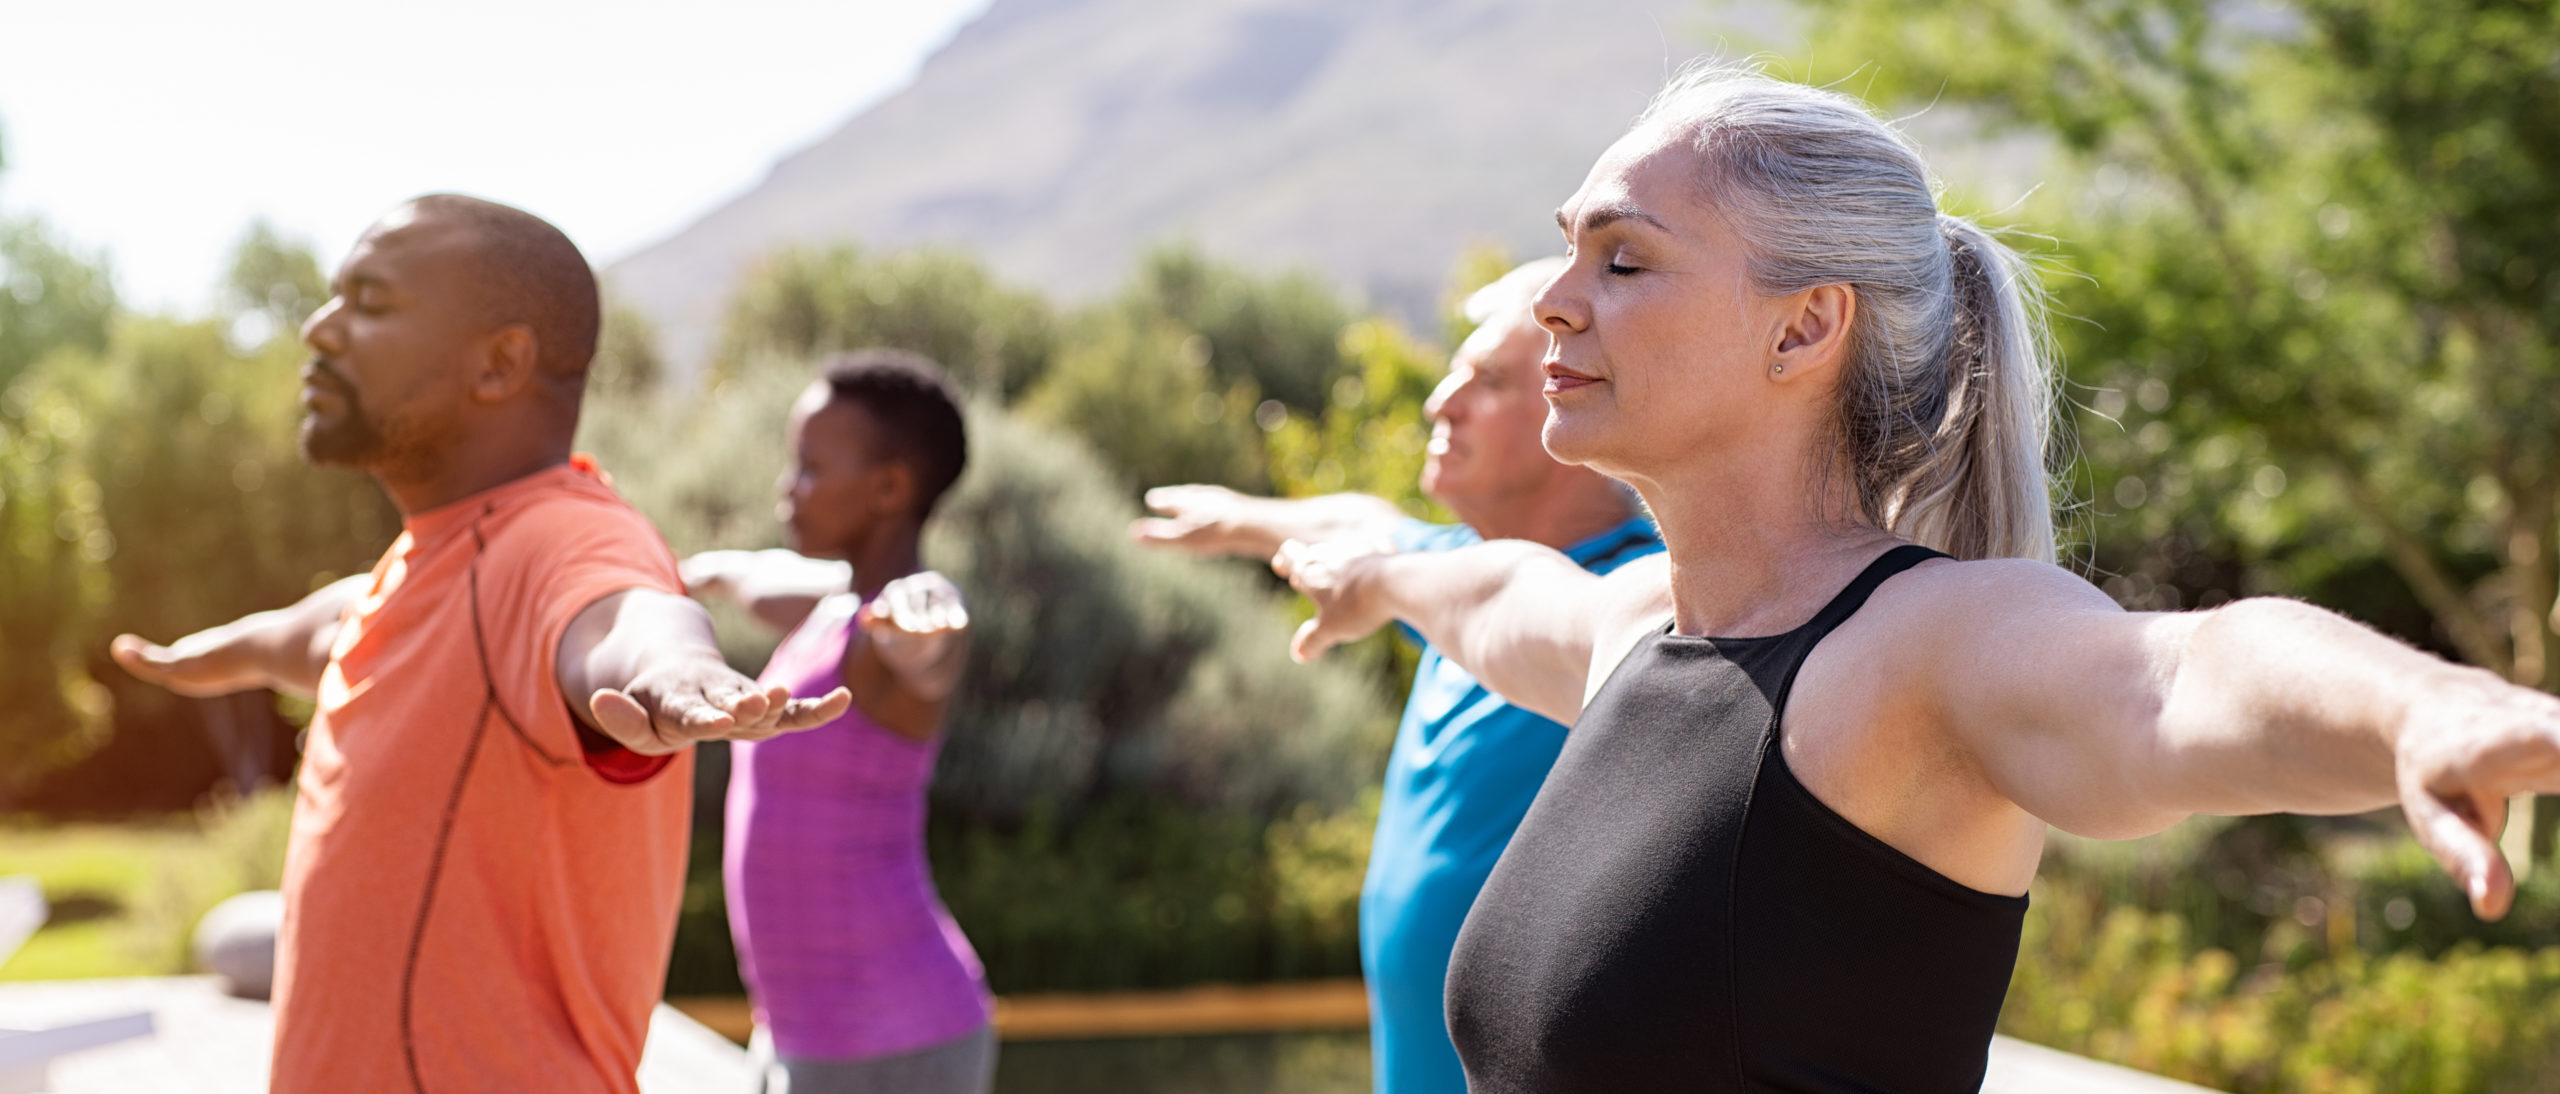 Group,Of,Senior,People,With,Closed,Eyes,Stretching,Arms,Outdoor.